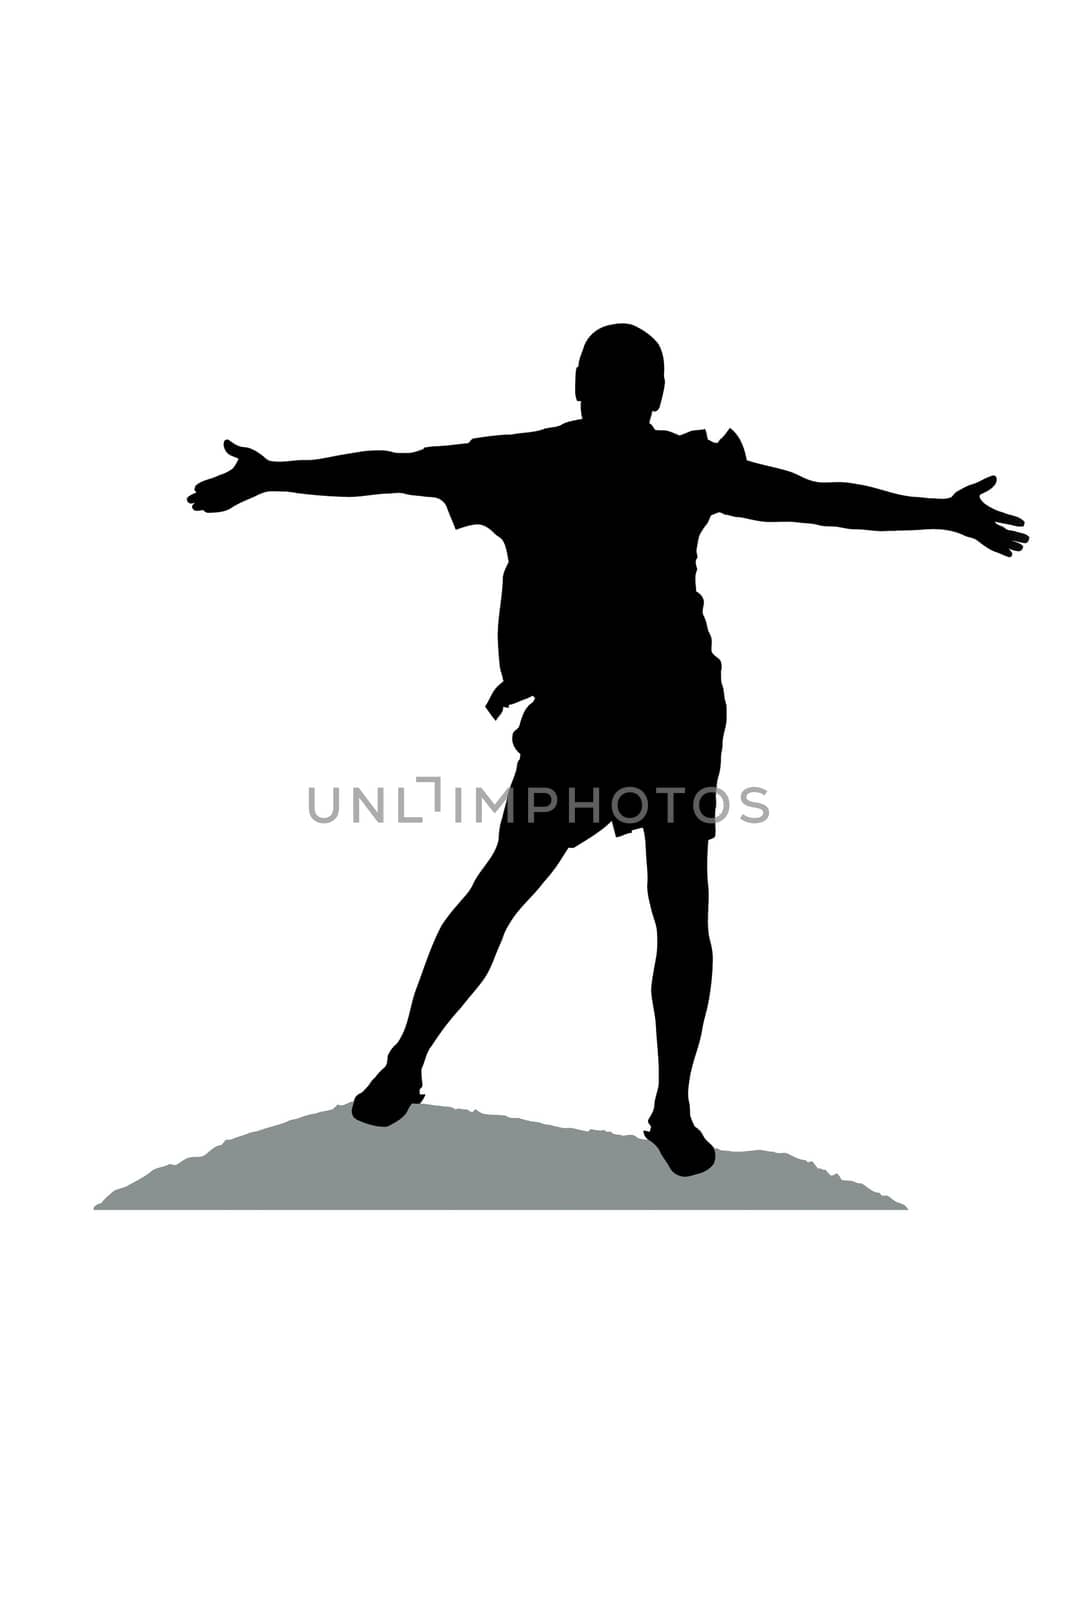 Silhouette of a man on a mountain top, isolated on white background.